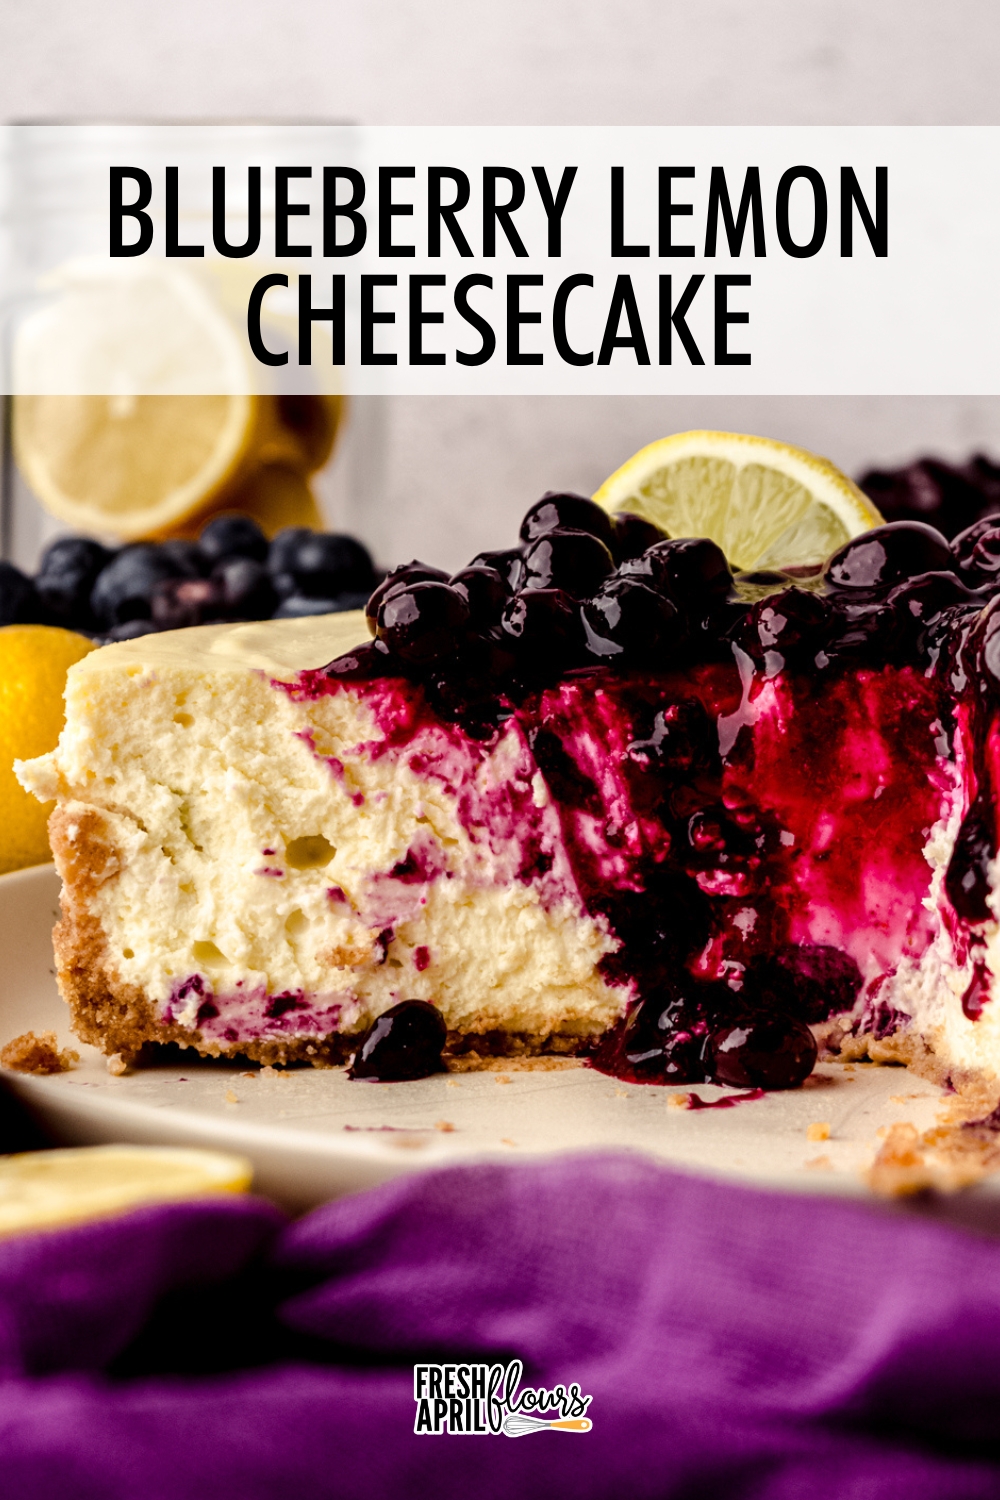 Tart, sweet, and creamy lemon cheesecake filled with juicy blueberries and topped with a fresh blueberry sauce. Use my no-foil method to make the easiest cheesecake water bath. via @frshaprilflours